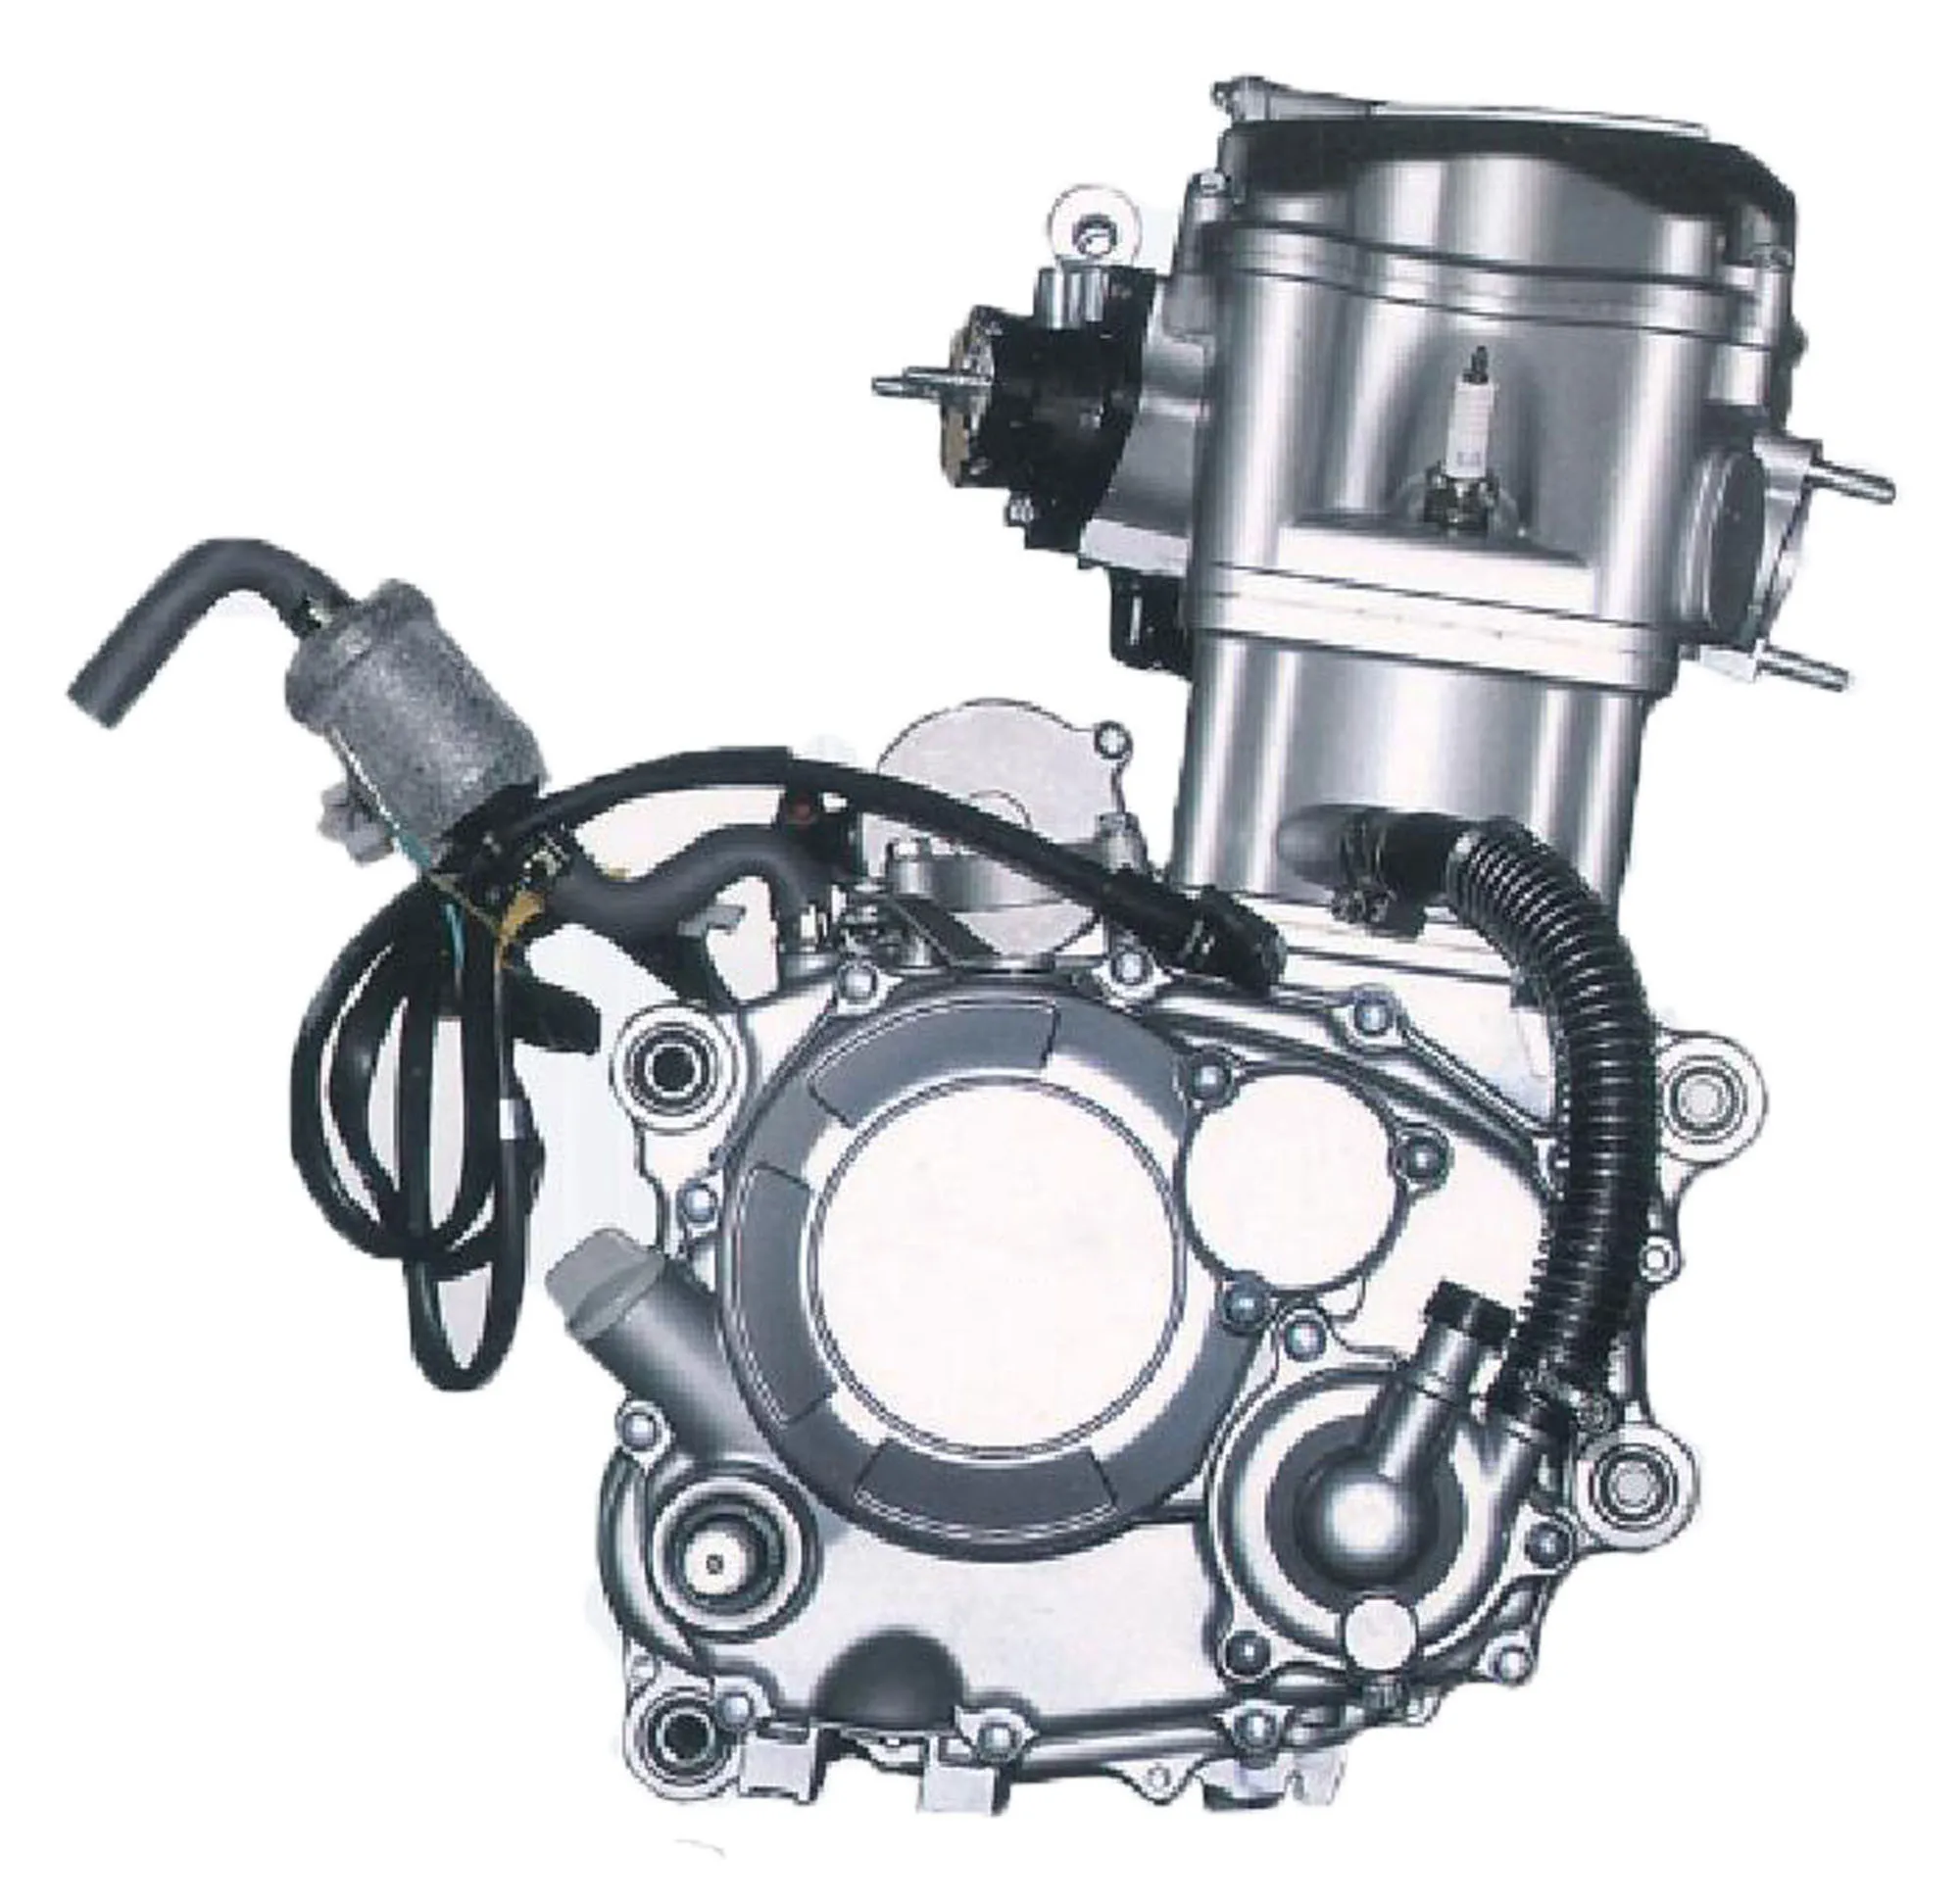 200cc engine with reverse